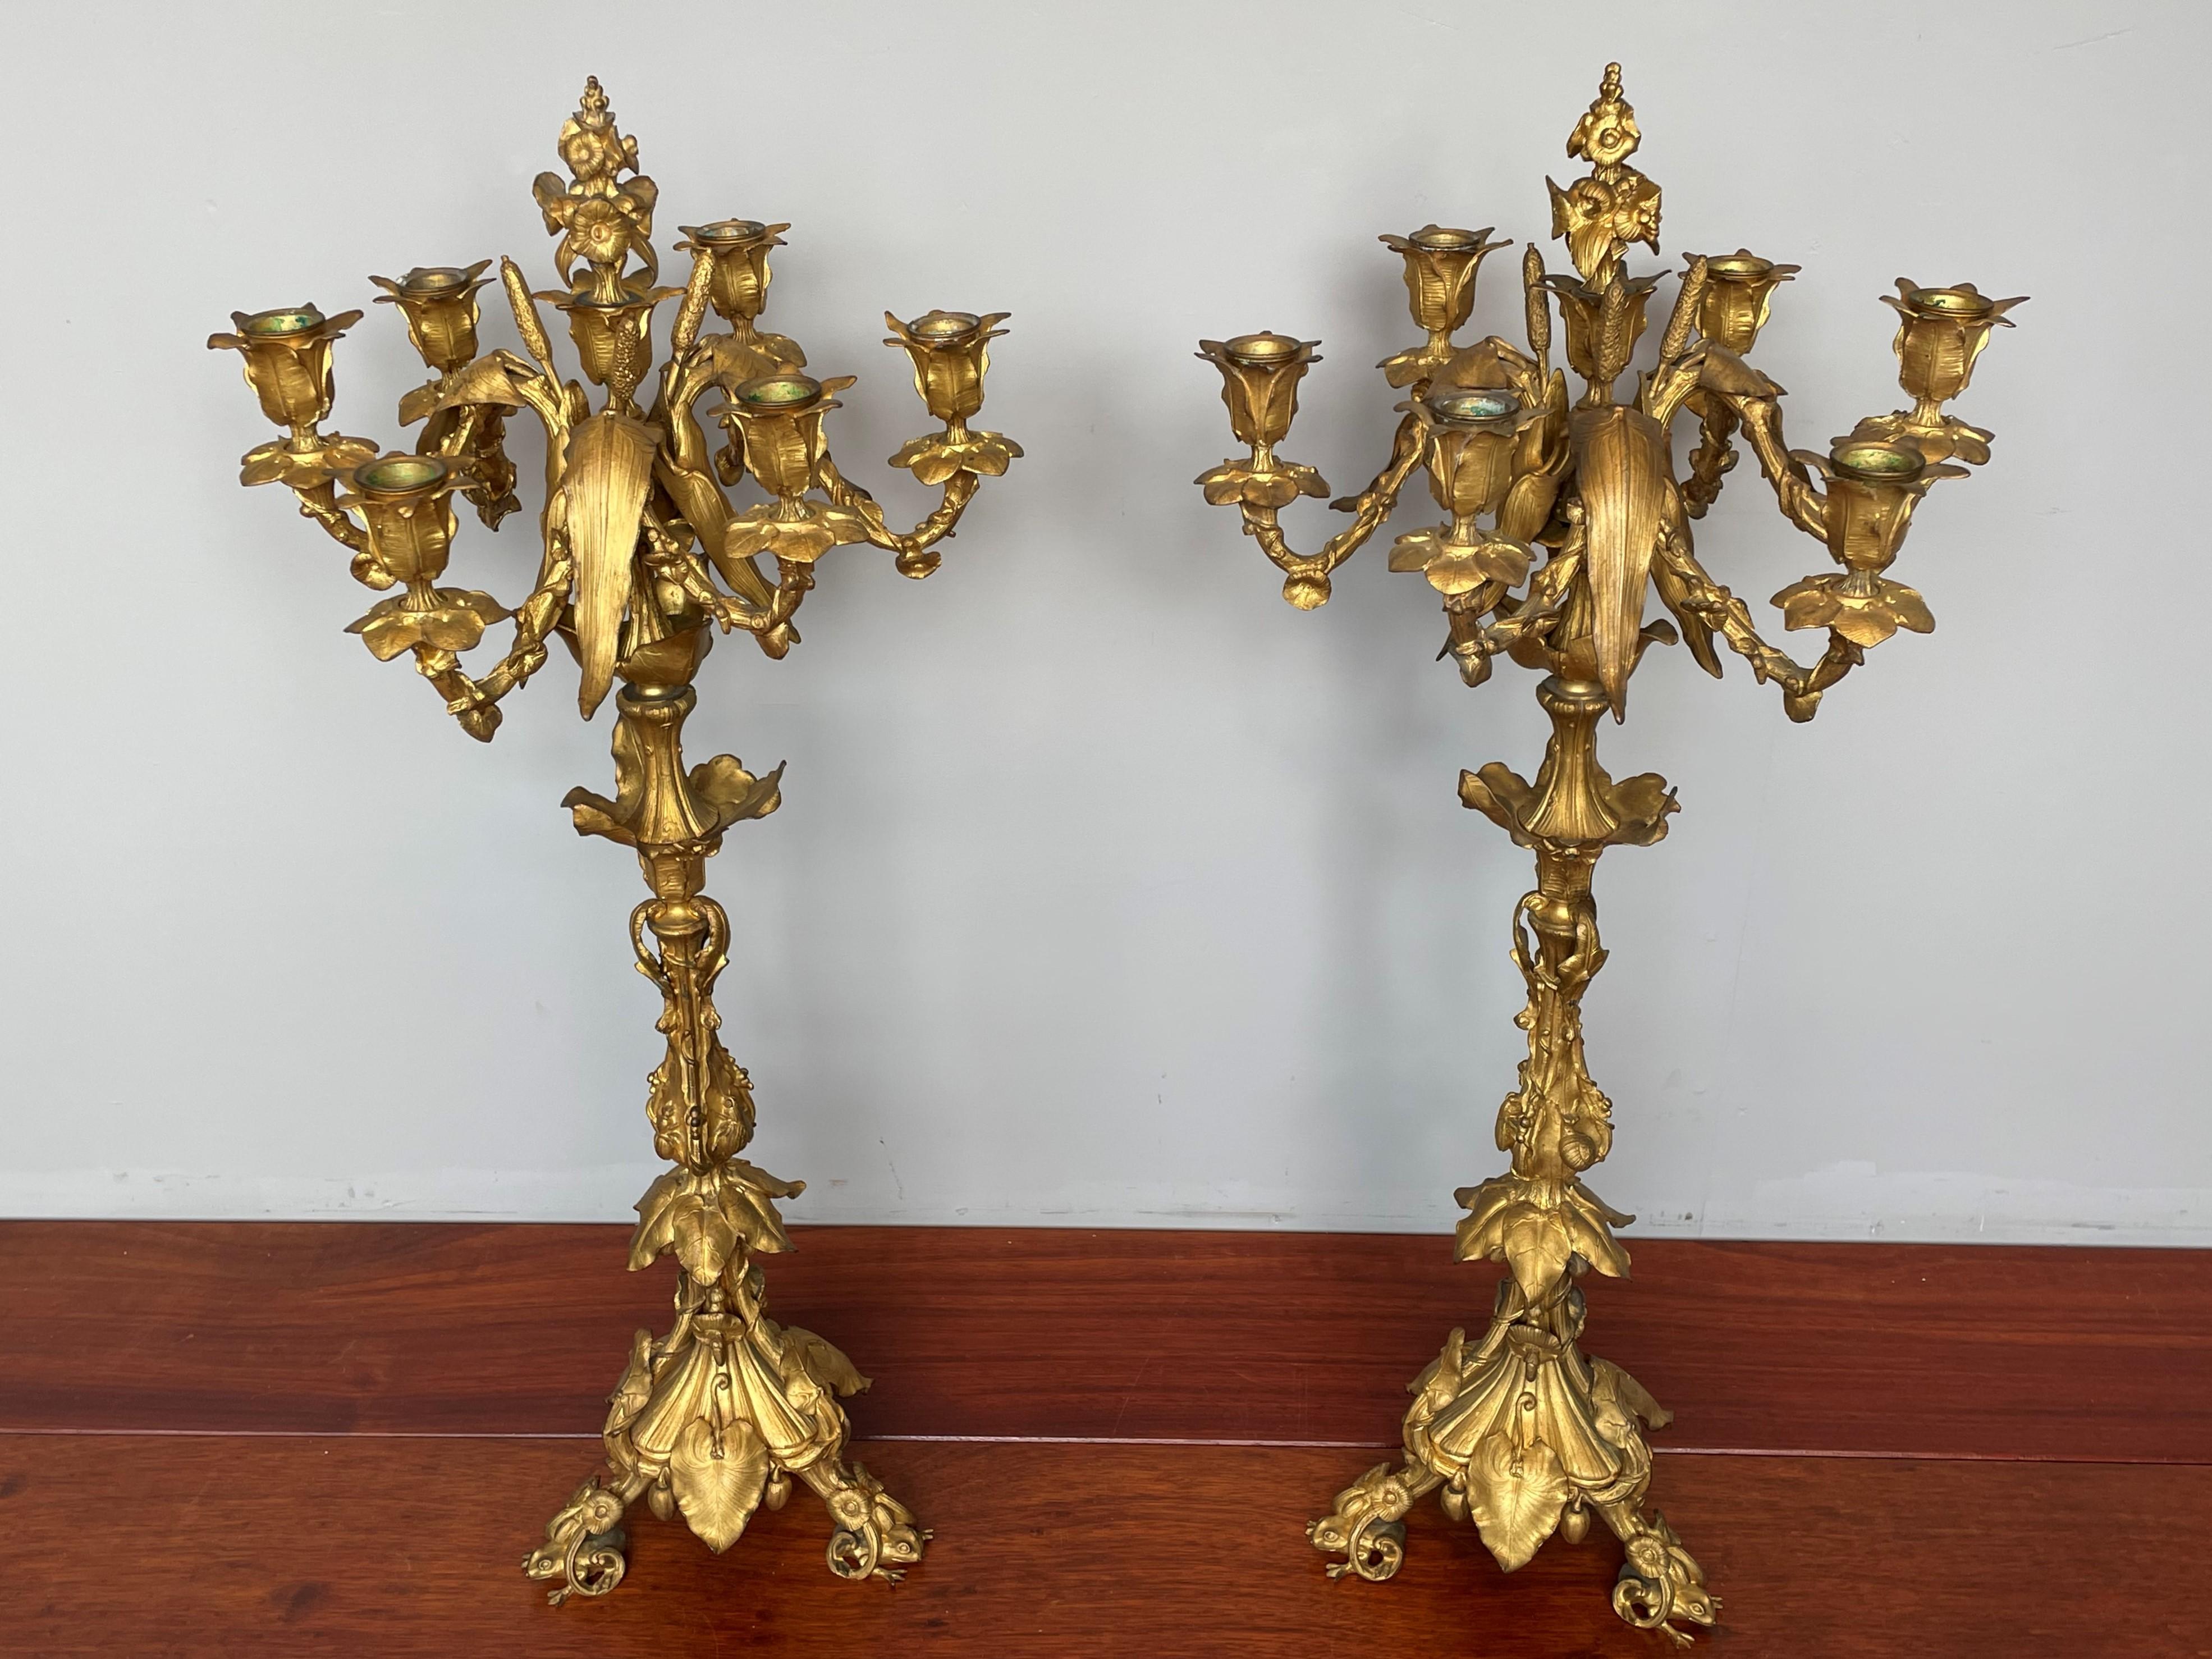 Important Pair of Belle Epoque Ormolu Candelabras w Frog Sculptures by H. Picard For Sale 2